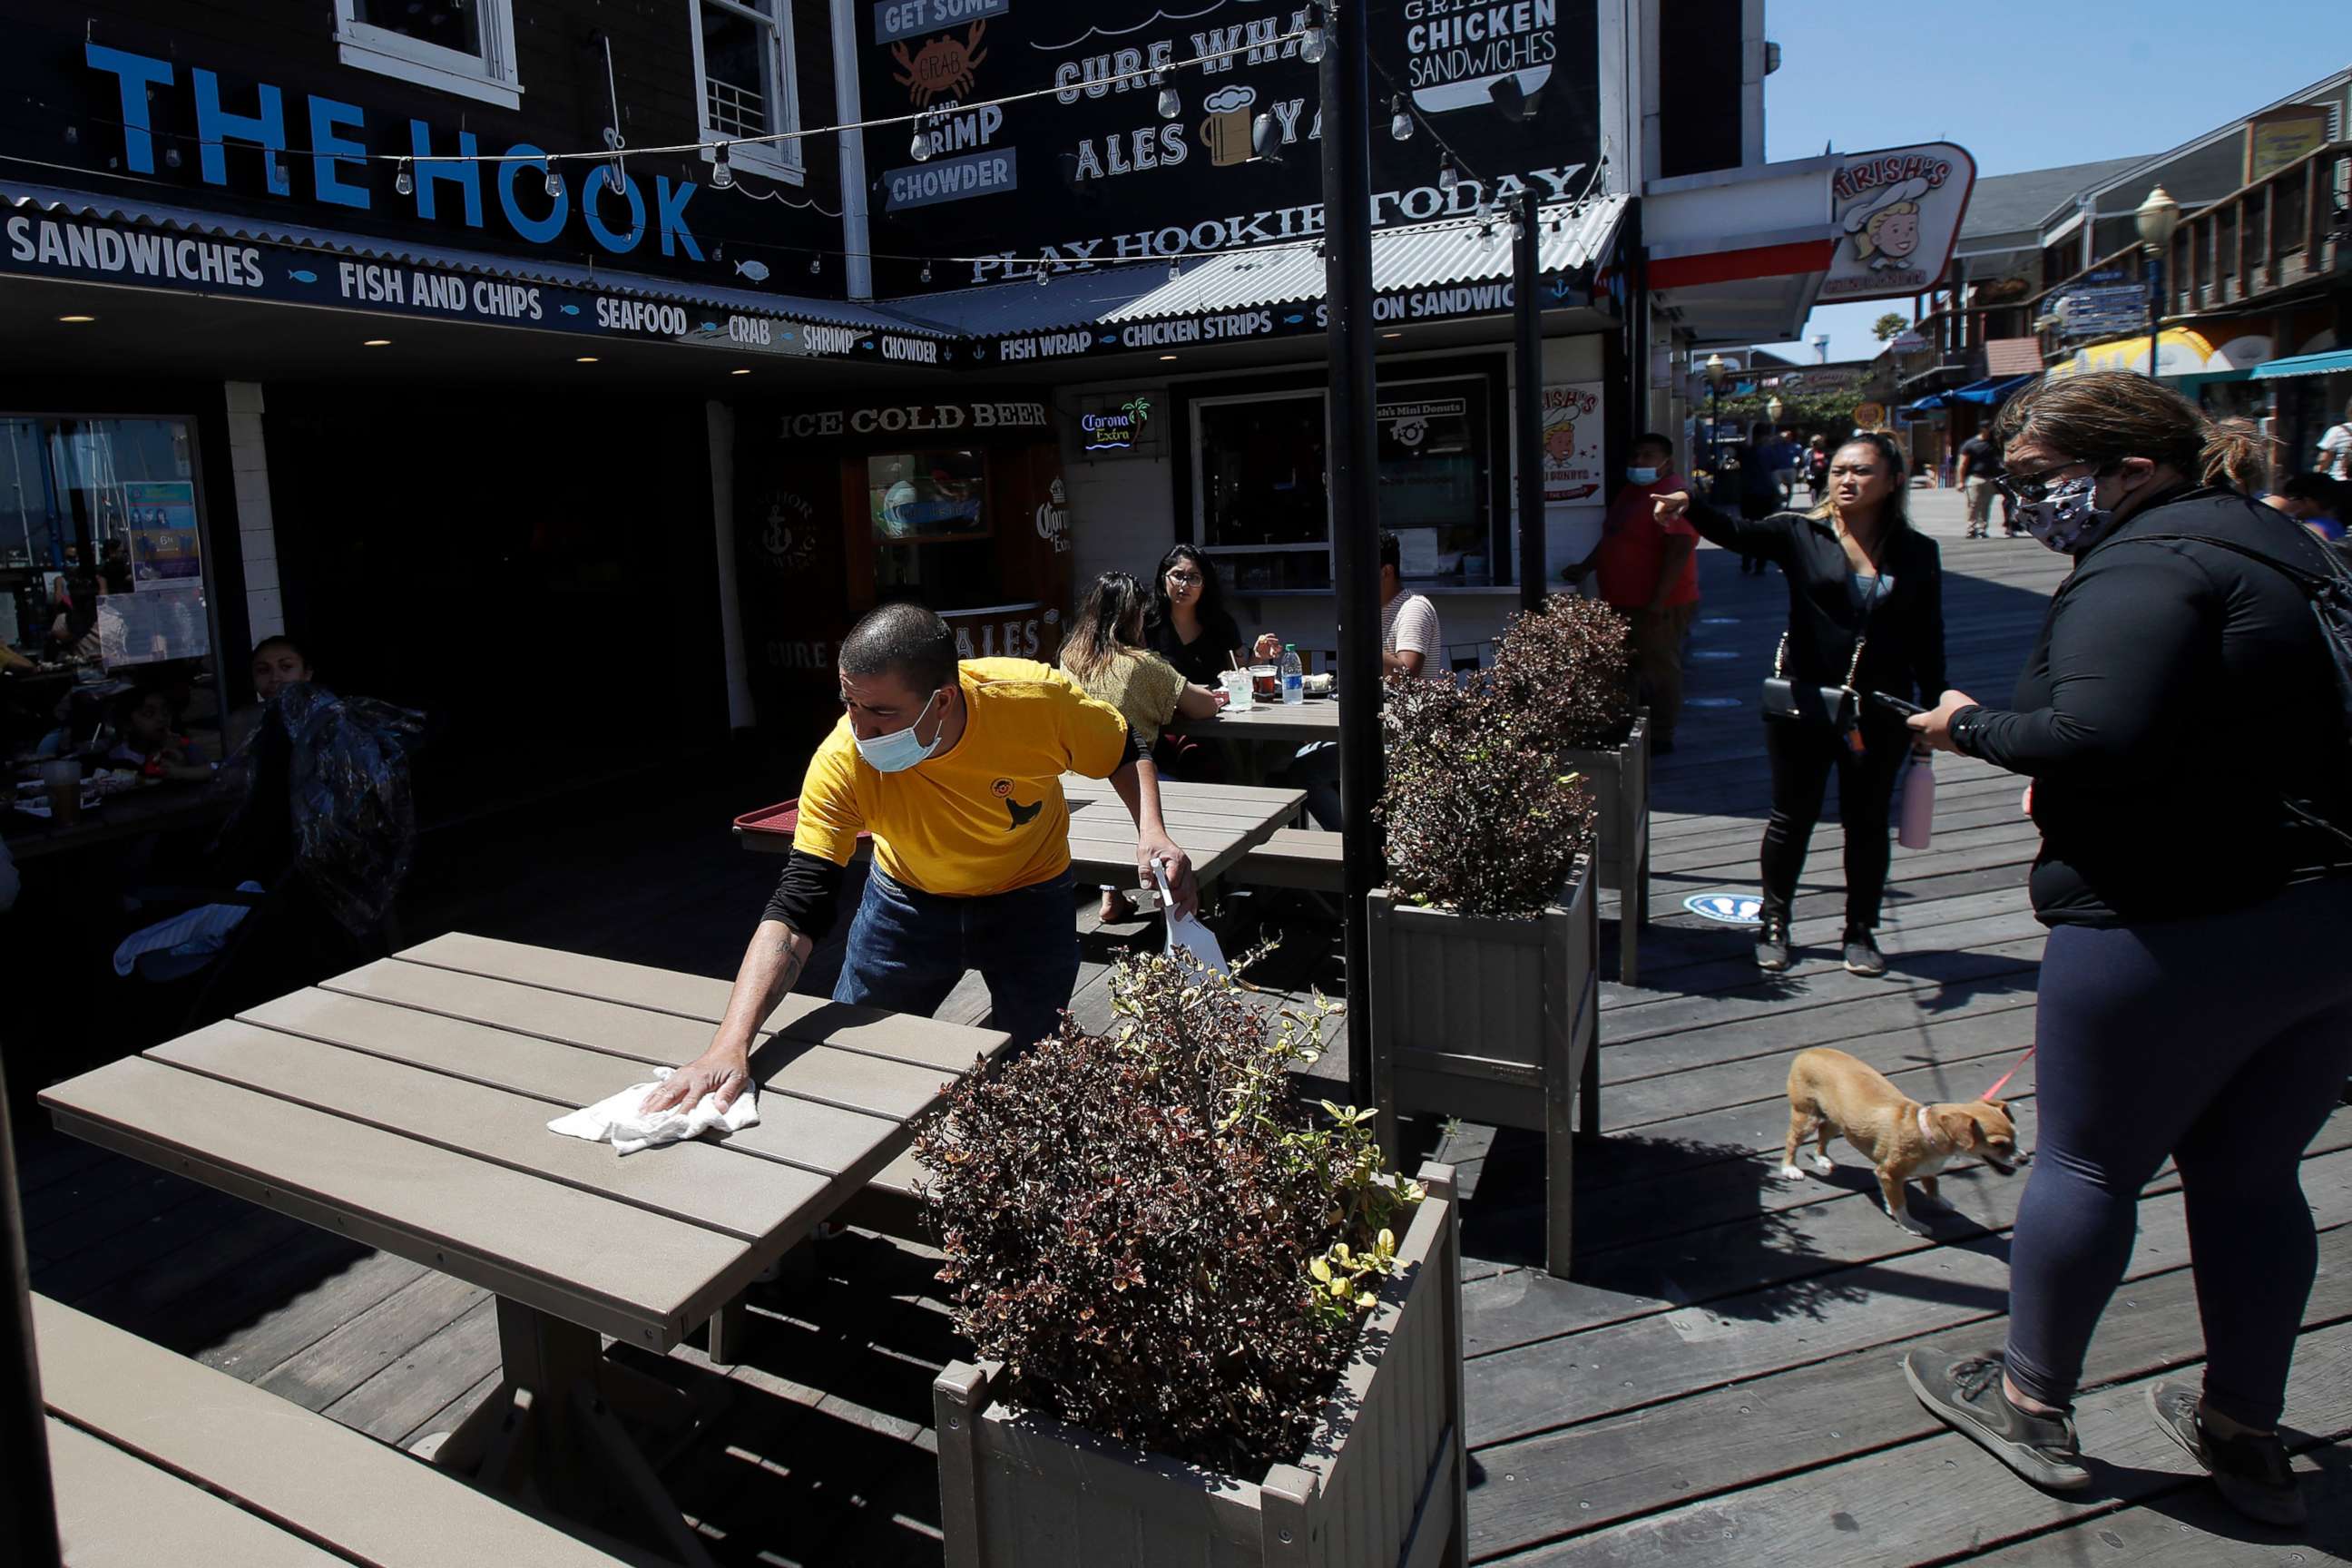 PHOTO: In this June 18, 2020, file photo a man wears a face mask while cleaning an outdoor dining table at The Hook at Pier 39, where some stores, restaurants and attractions have reopened, during the coronavirus outbreak in San Francisco.